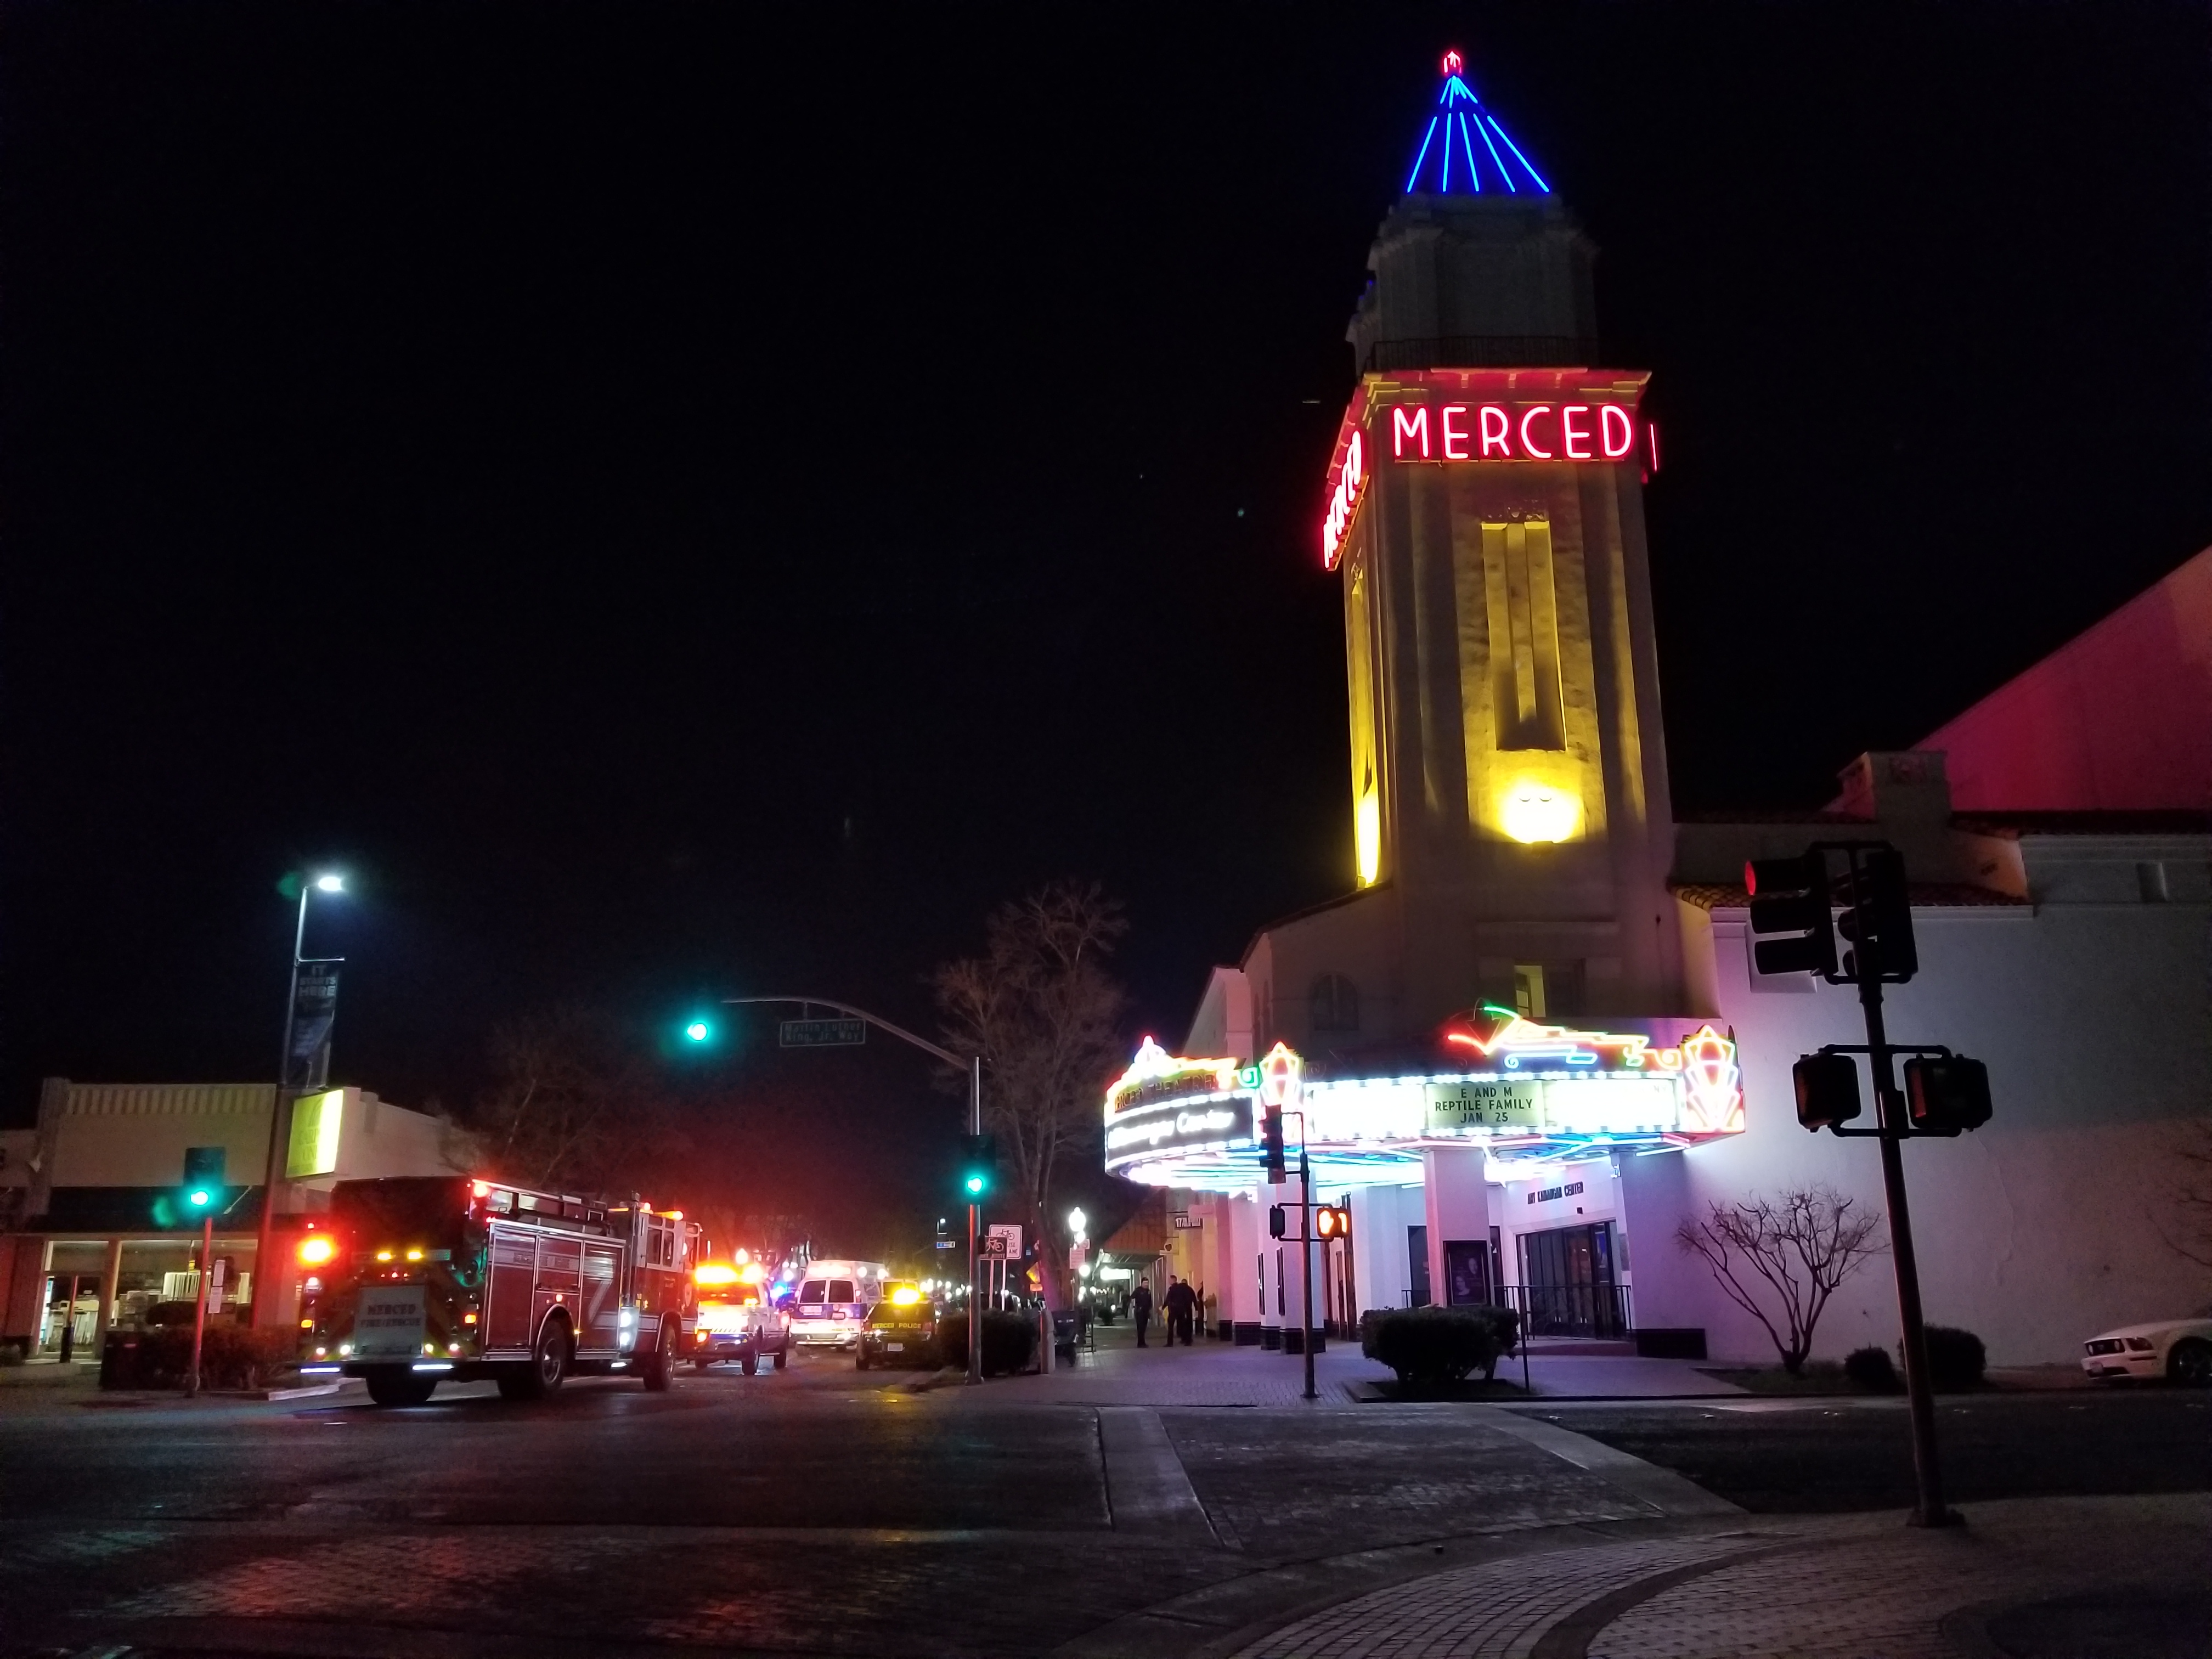 Man stabbed in his back in downtown Merced last night